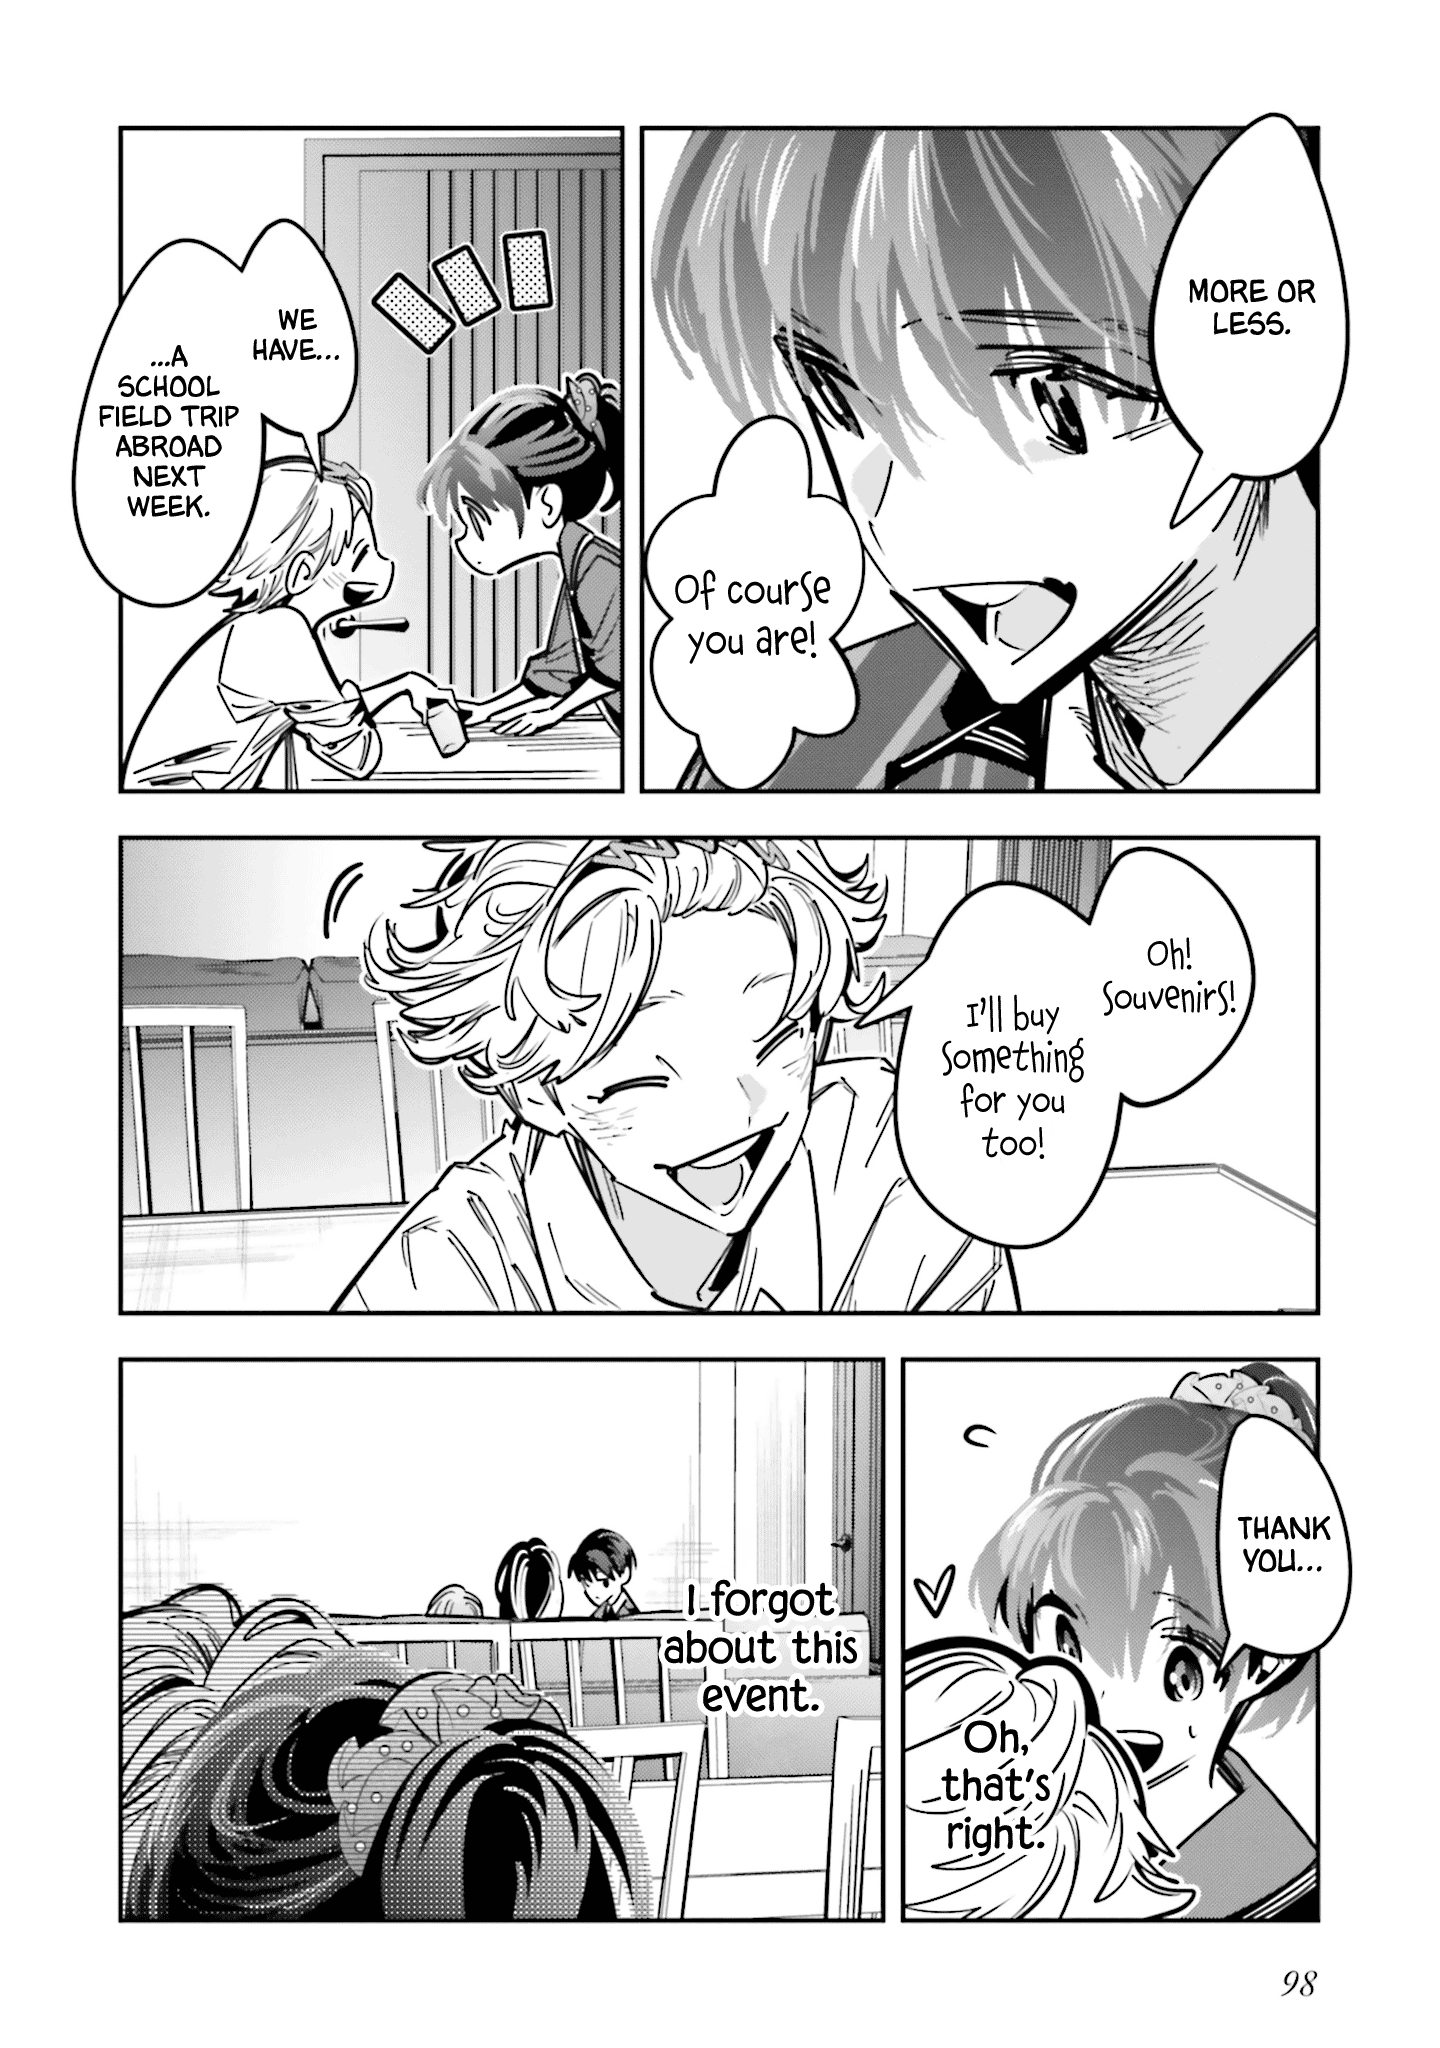 I Reincarnated As The Little Sister Of A Death Game Manga's Murder Mastermind And Failed Chapter 8 #2